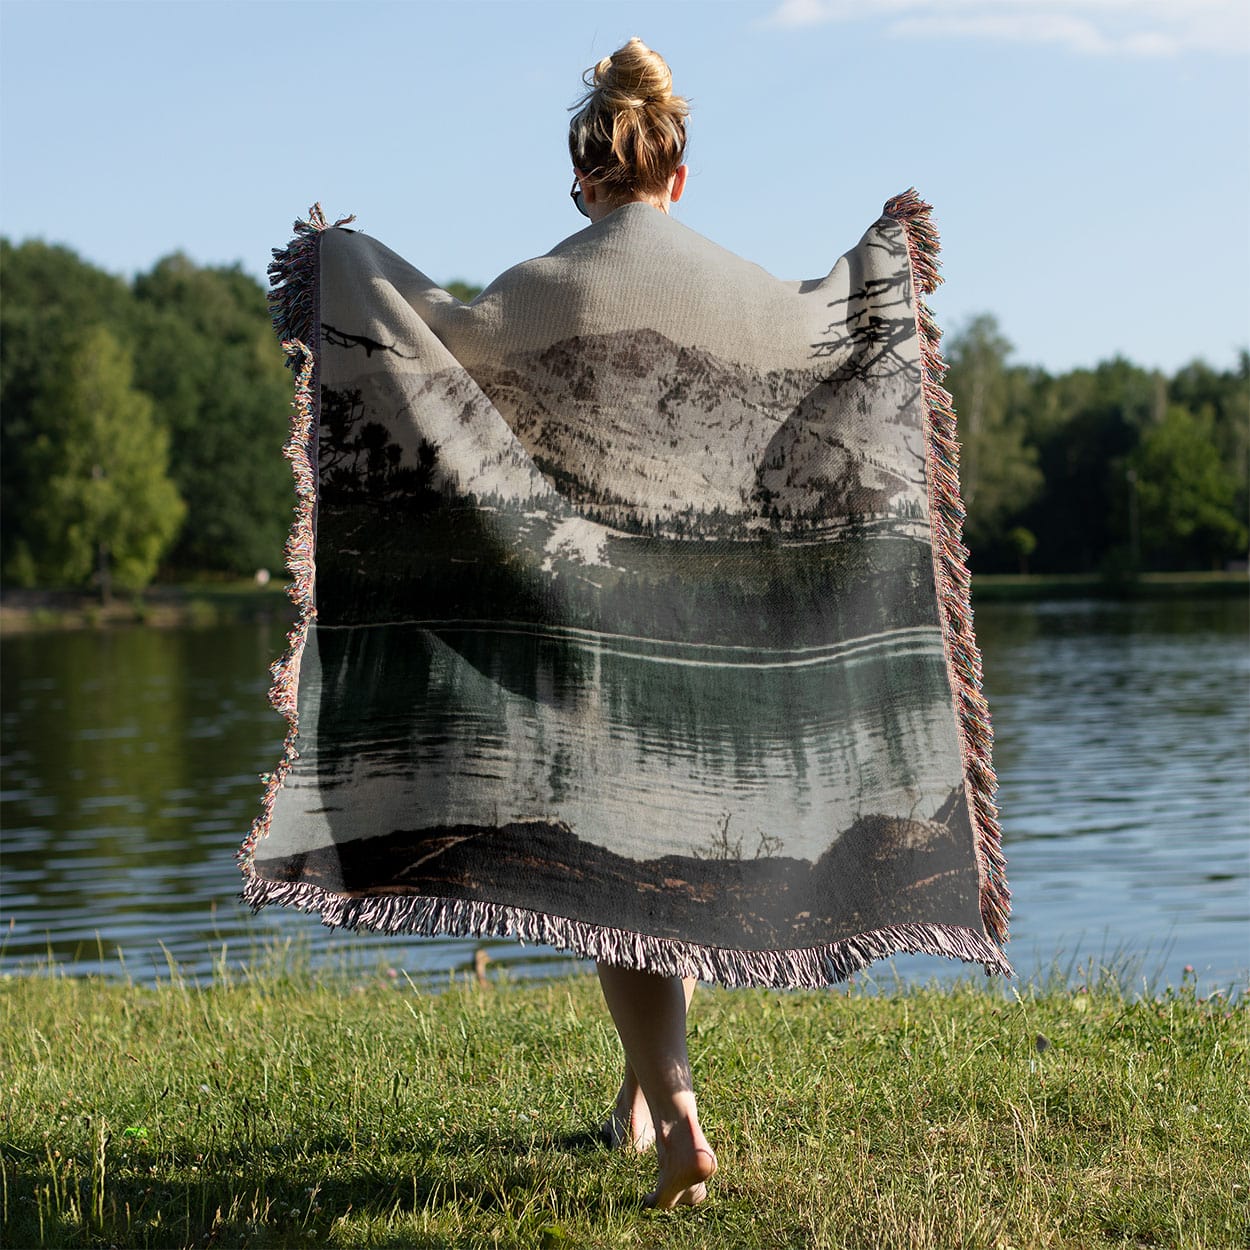 Snowy Mountains Woven Blanket Held on a Woman's Back Outside